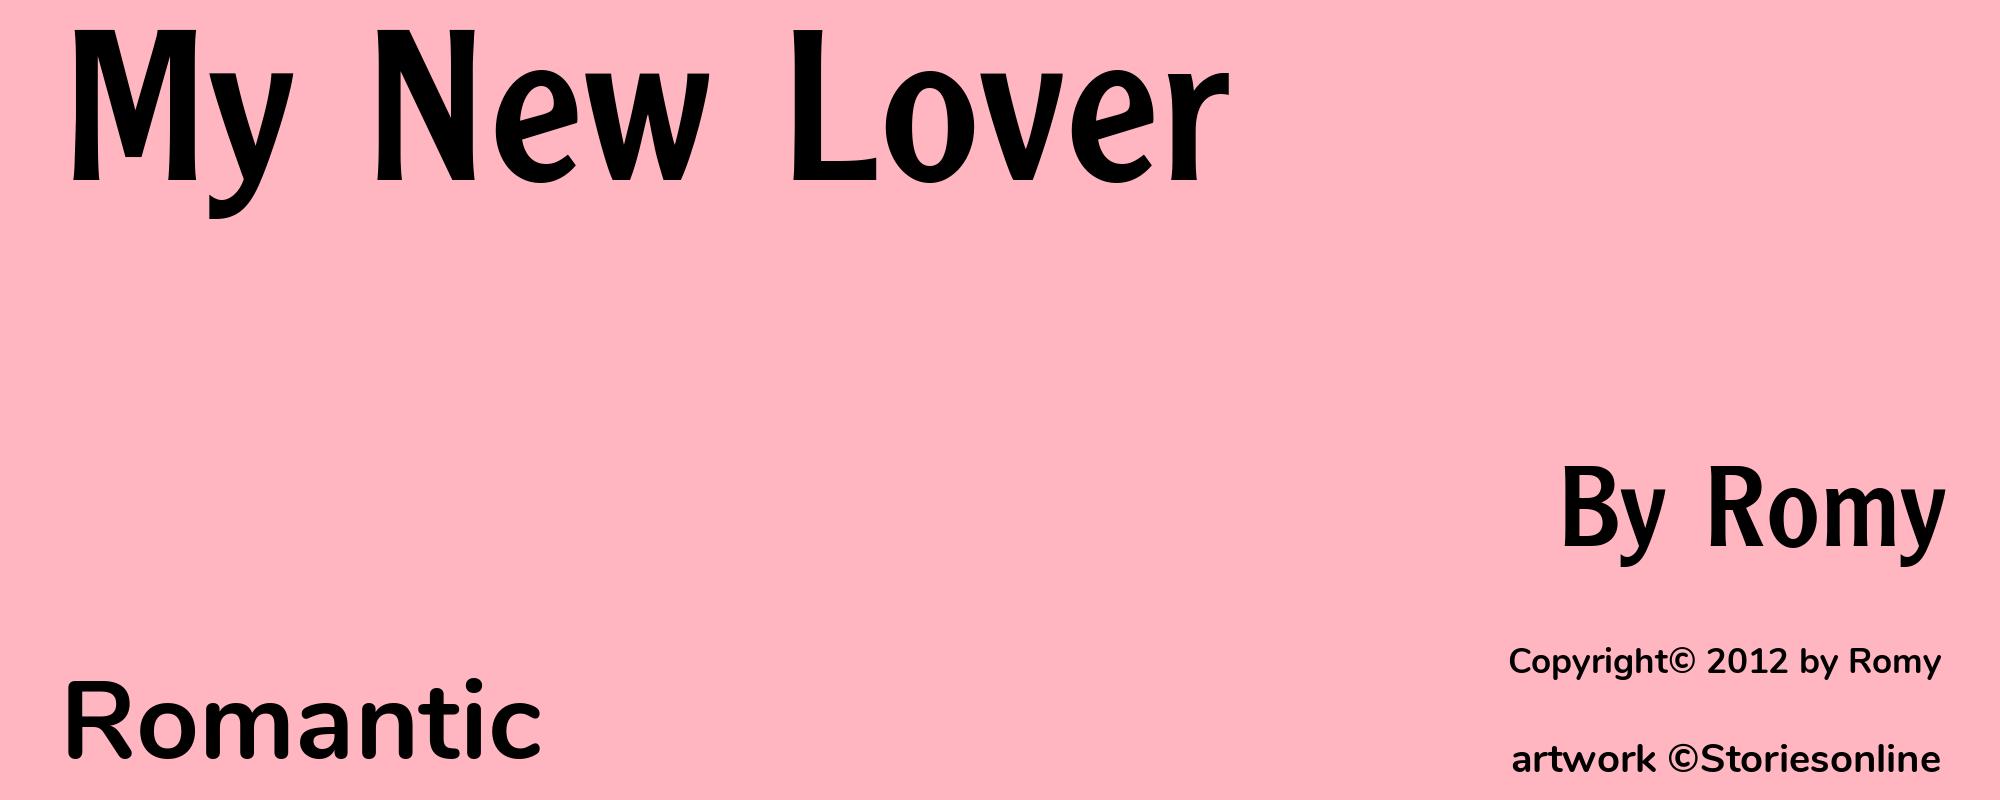 My New Lover - Cover